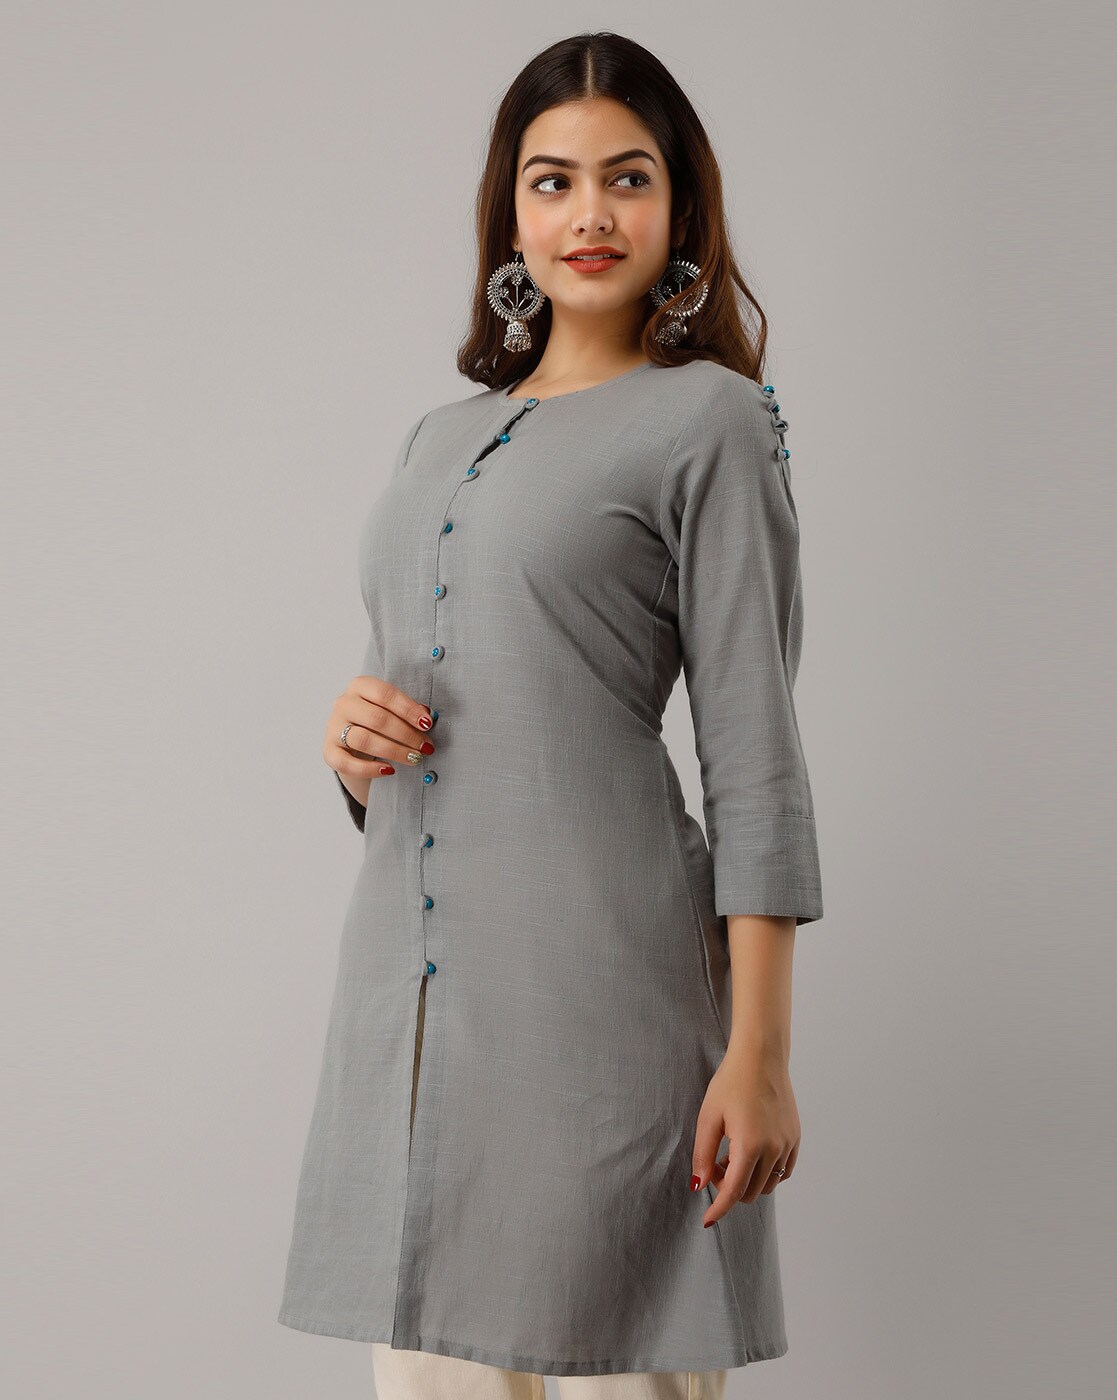 BLUE HILLS BY KINTI HANDLOOM NEW PRINCESS CUT FRONT BUTTONS READYMADE  SUMMER SPECIAL LATEST GIRLISH FANCY KURTIS WITH SIDE POCKET BEST RATE  ONLINE IN INDIA MALAYSIA UK - Reewaz International | Wholesaler